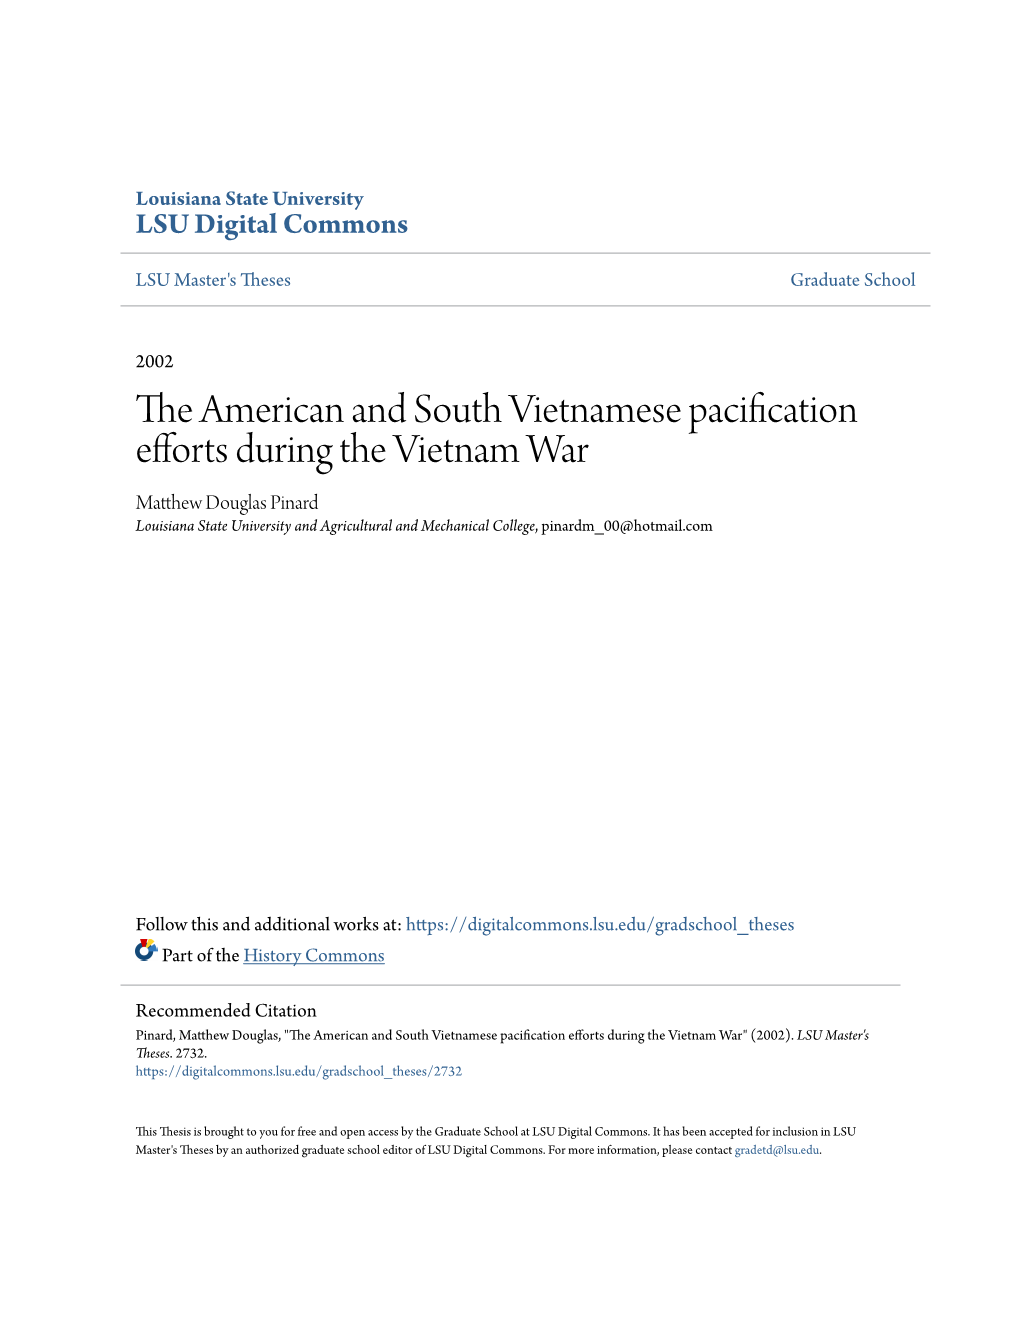 The American and South Vietnamese Pacification Efforts During the Vietnam